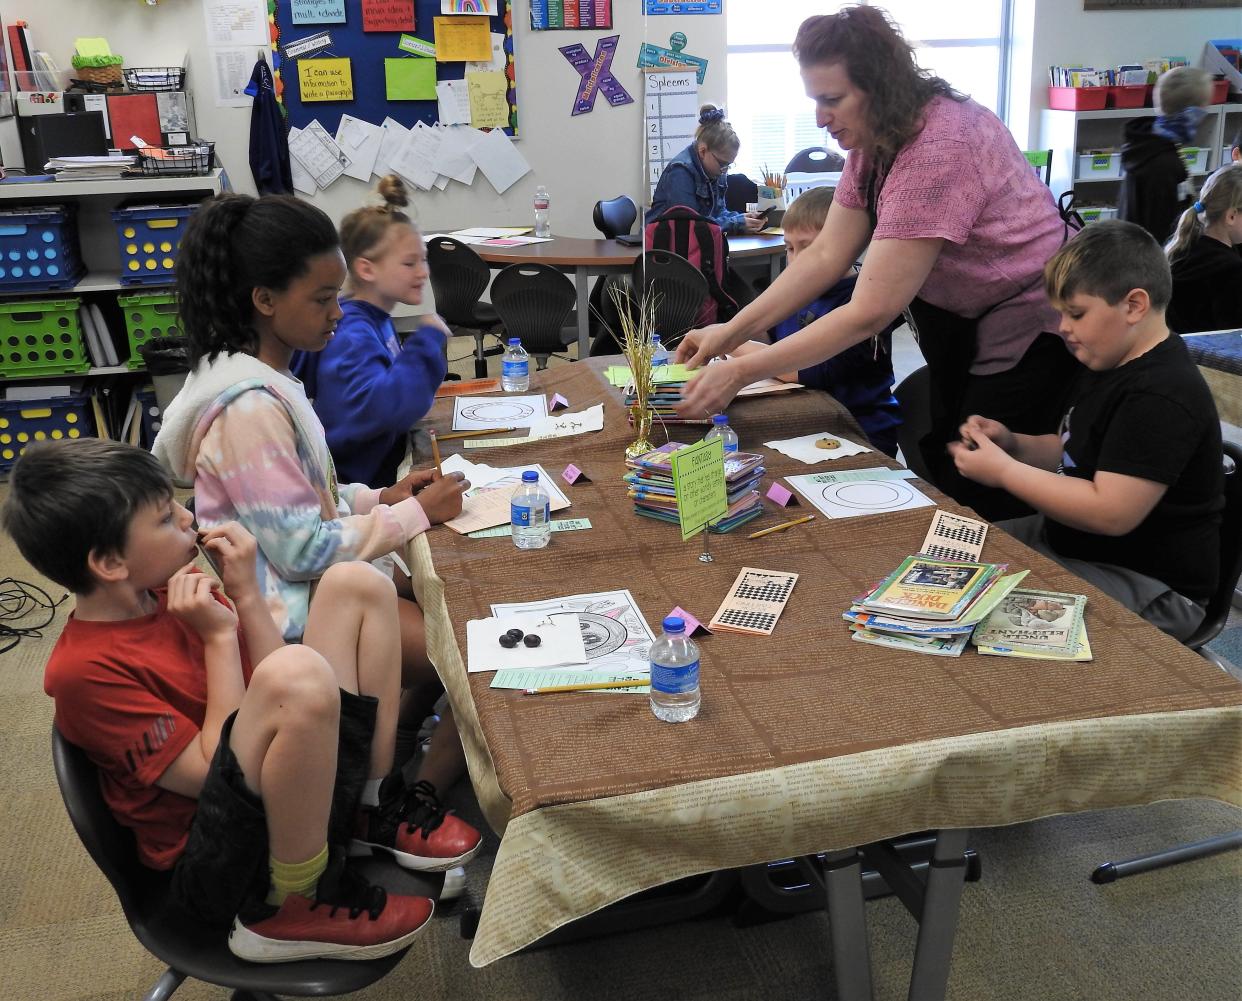 Amy Unkefer, third grade teacher at Coshocton Elementary School, passes out a new set of books to students during a book tasting activity. Students are in an imaginary café and having treats while checking out books to see what ones they might like to read in full.